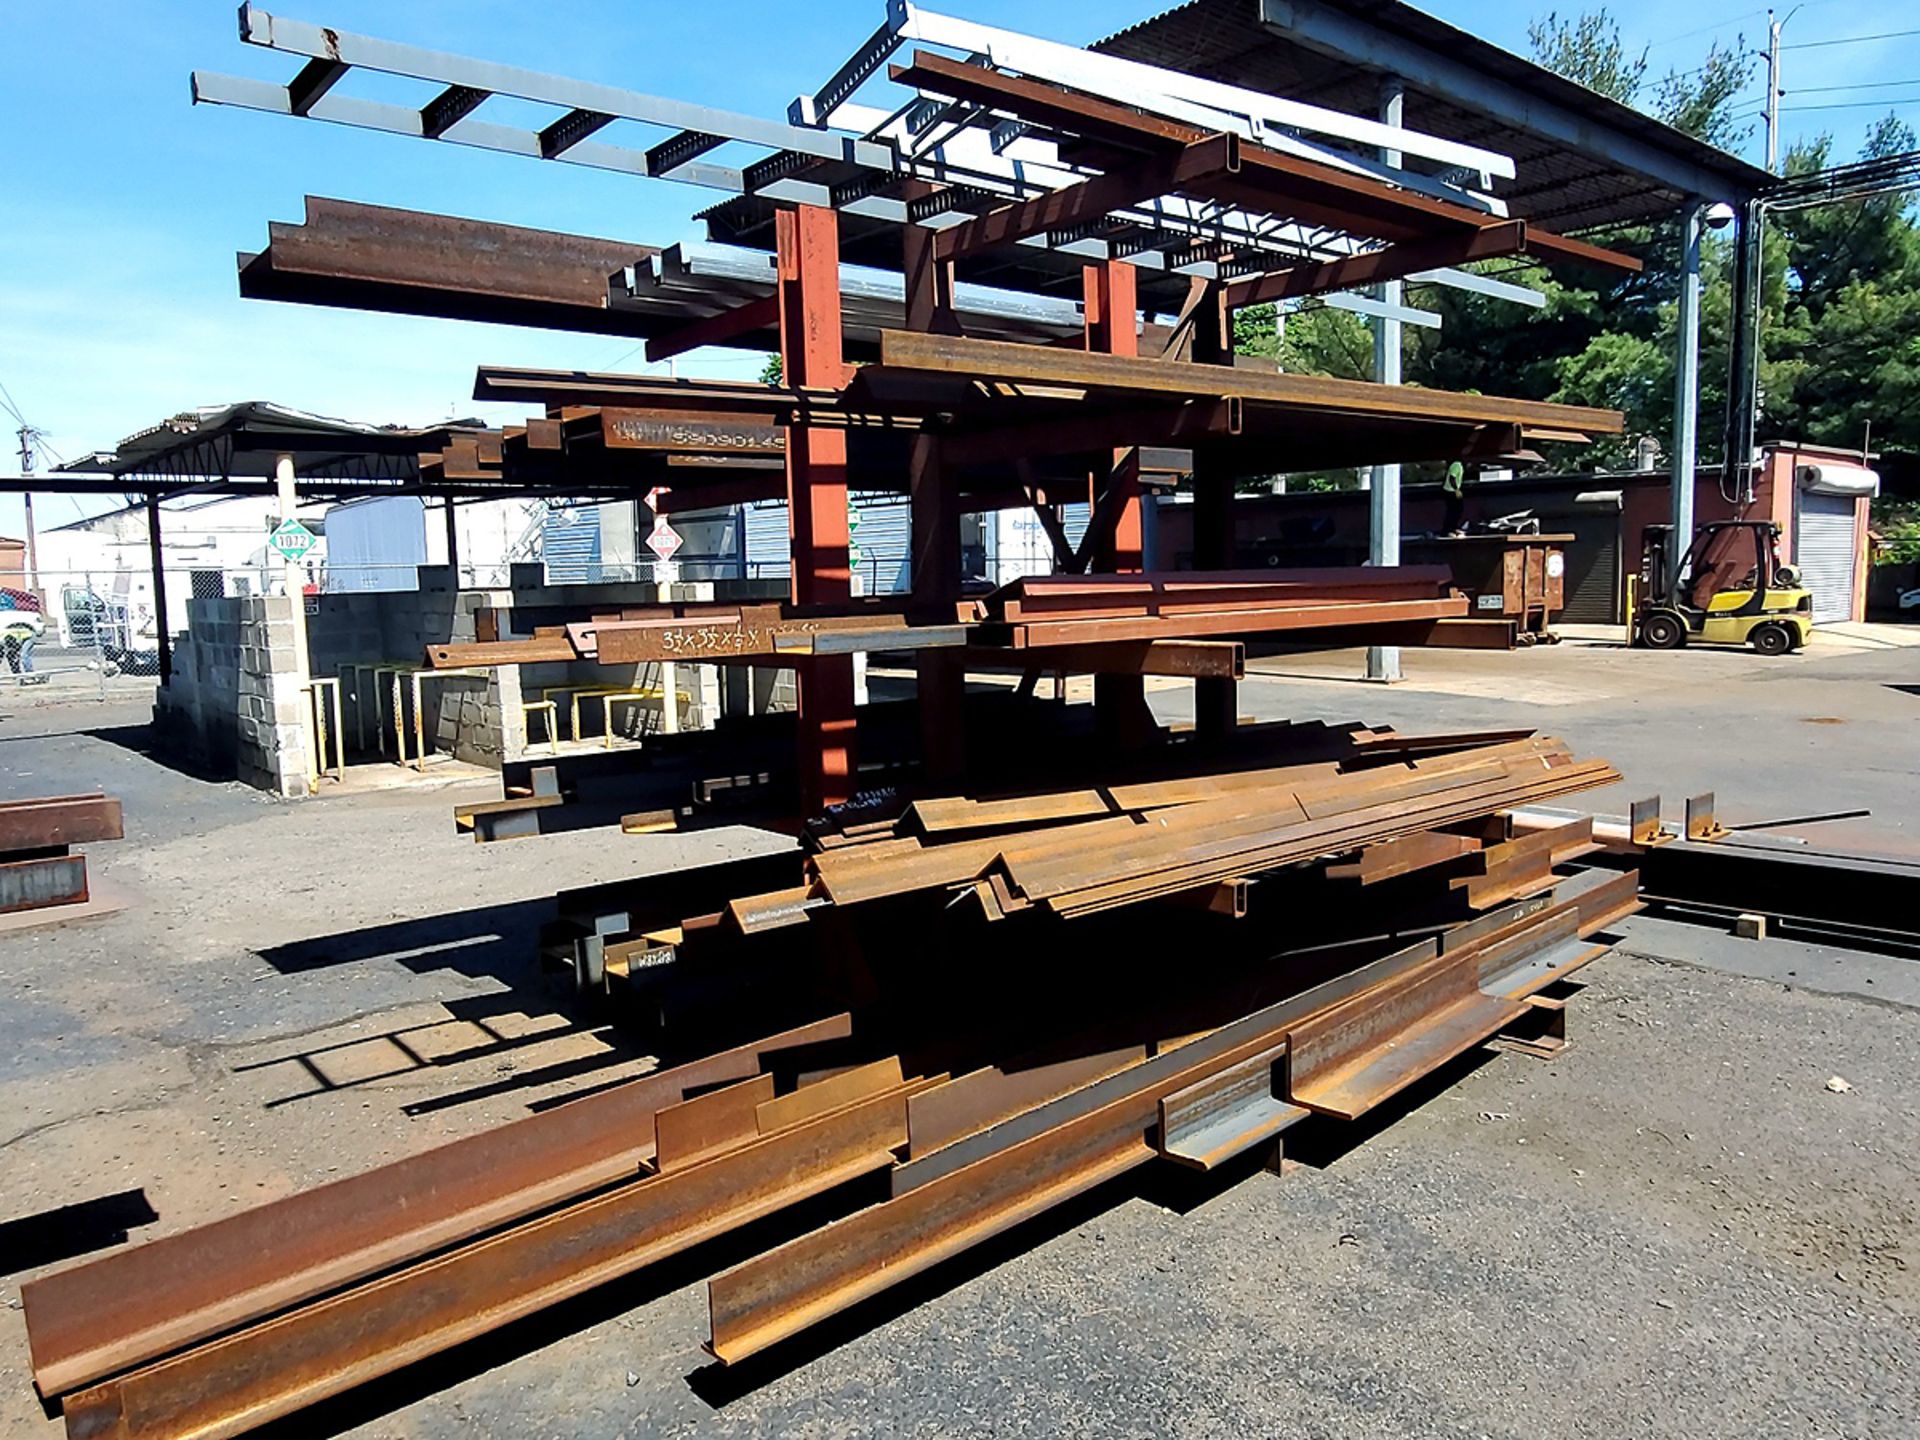 A Group of Ass't Size Steel Angle Iron, U-Channel Beams, T Beams, and Mountable Ladders on Rack